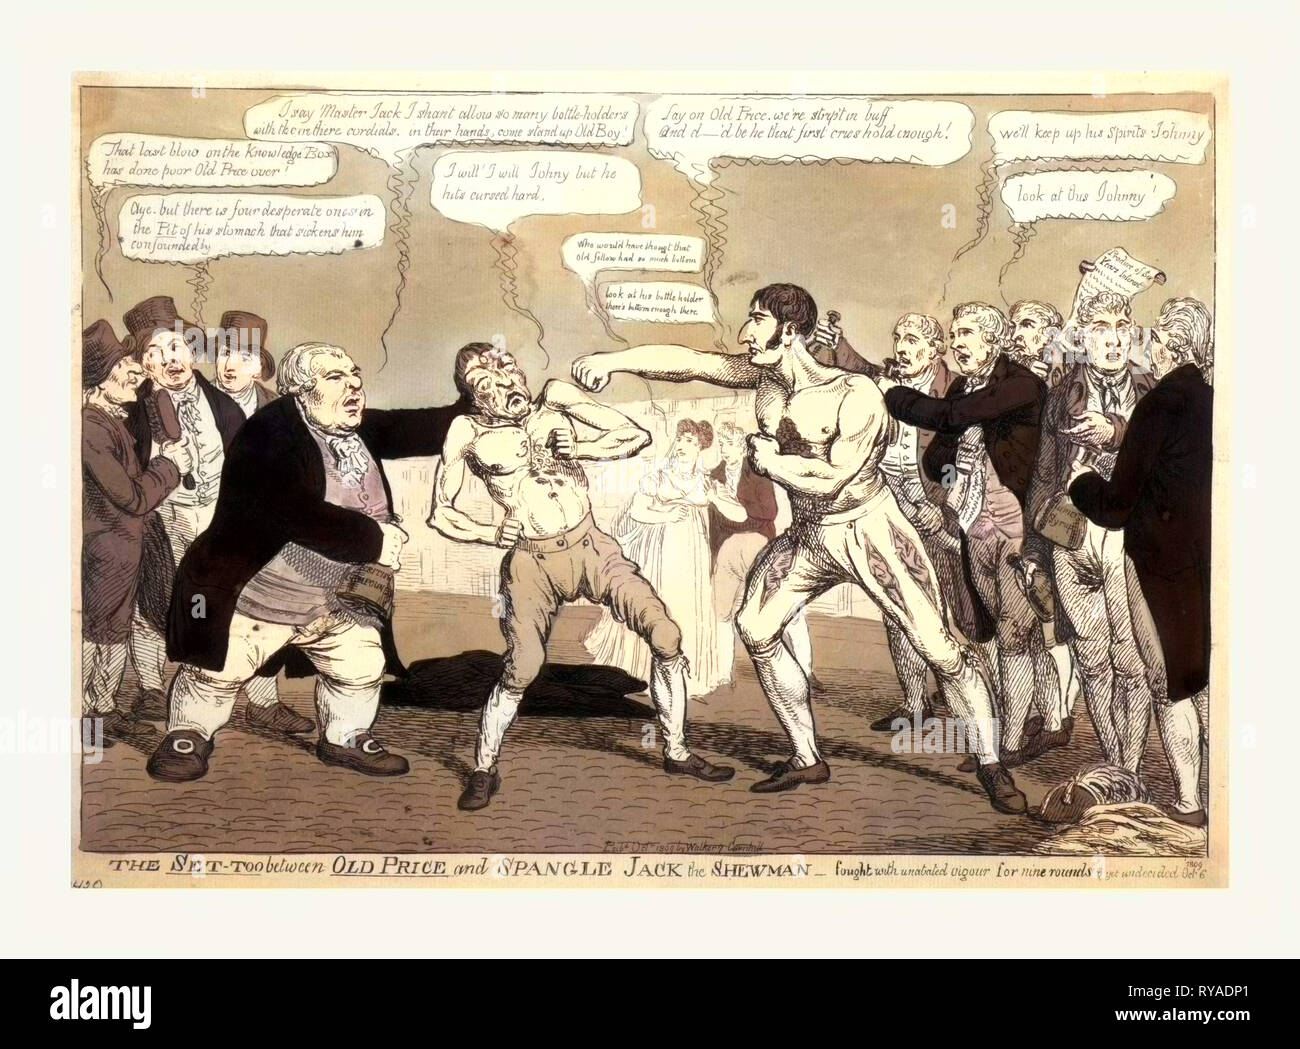 The Set-Too Between Old Price and Spangle Jack the Shewman - Fought with Unabated Vigour for Nine Rounds & Yet Undecided, Engraving 1809, a Pugilistic Encounter, Over New Theater Prices, Between John Philip Kemble, Tall and Muscular, and Old Price, a Much Smaller and Weaker Opponent Stock Photo